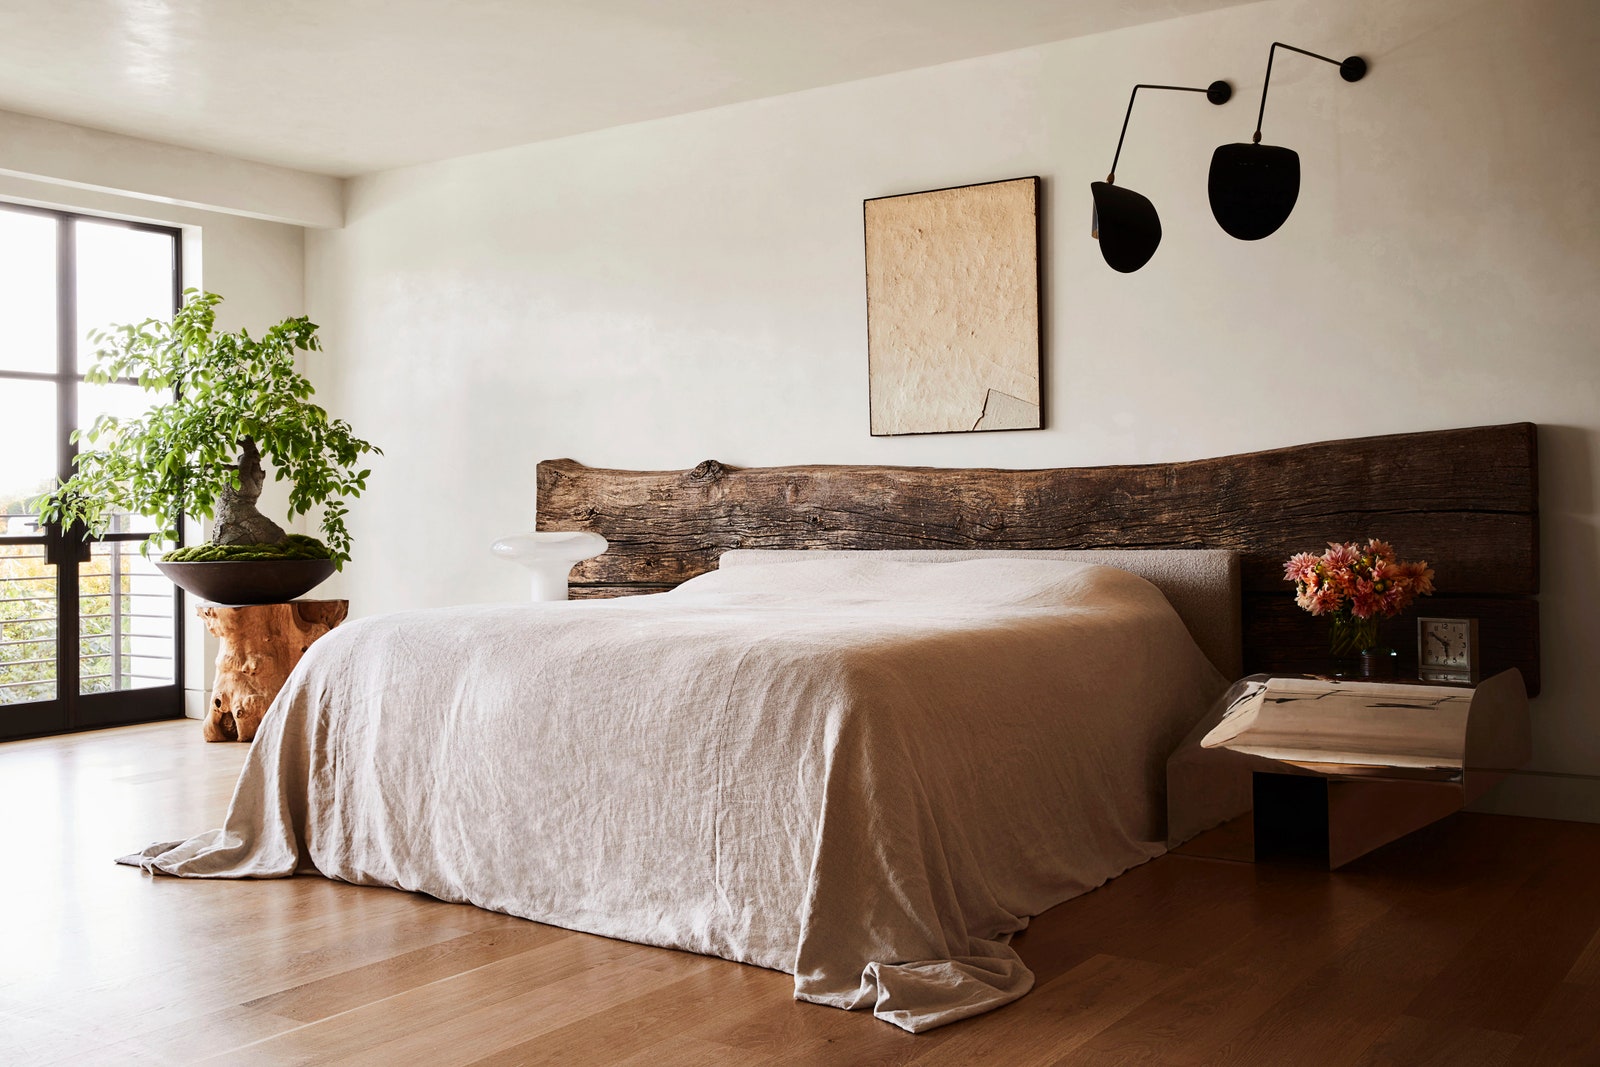 Designer Jane Hallworth went with a natural freeflowing bedcover in the primary bedroom of Tinder founder Sean Rad and...